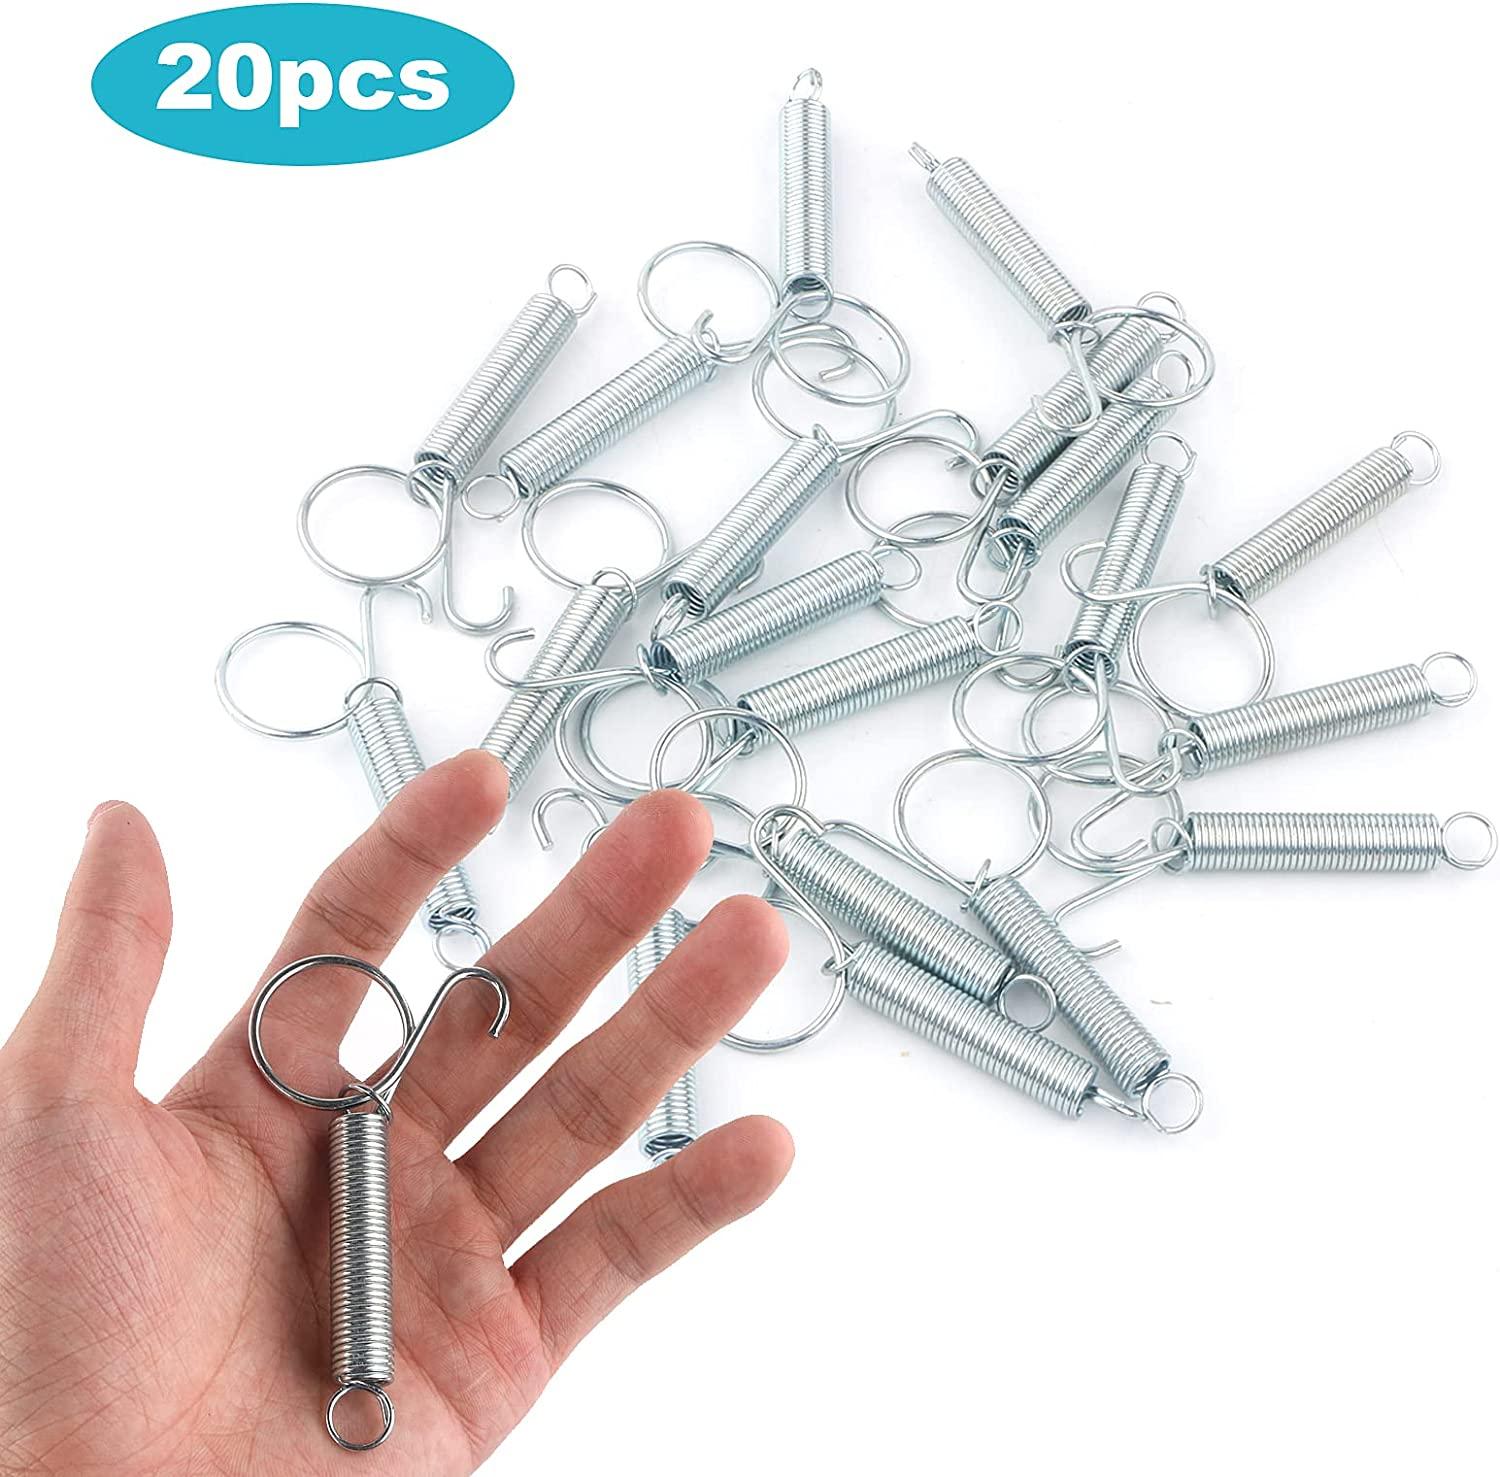 Cage Door Spring Hook Fixed Pet Stainless Steel Tool Hooks Small Animals 10  Pcs